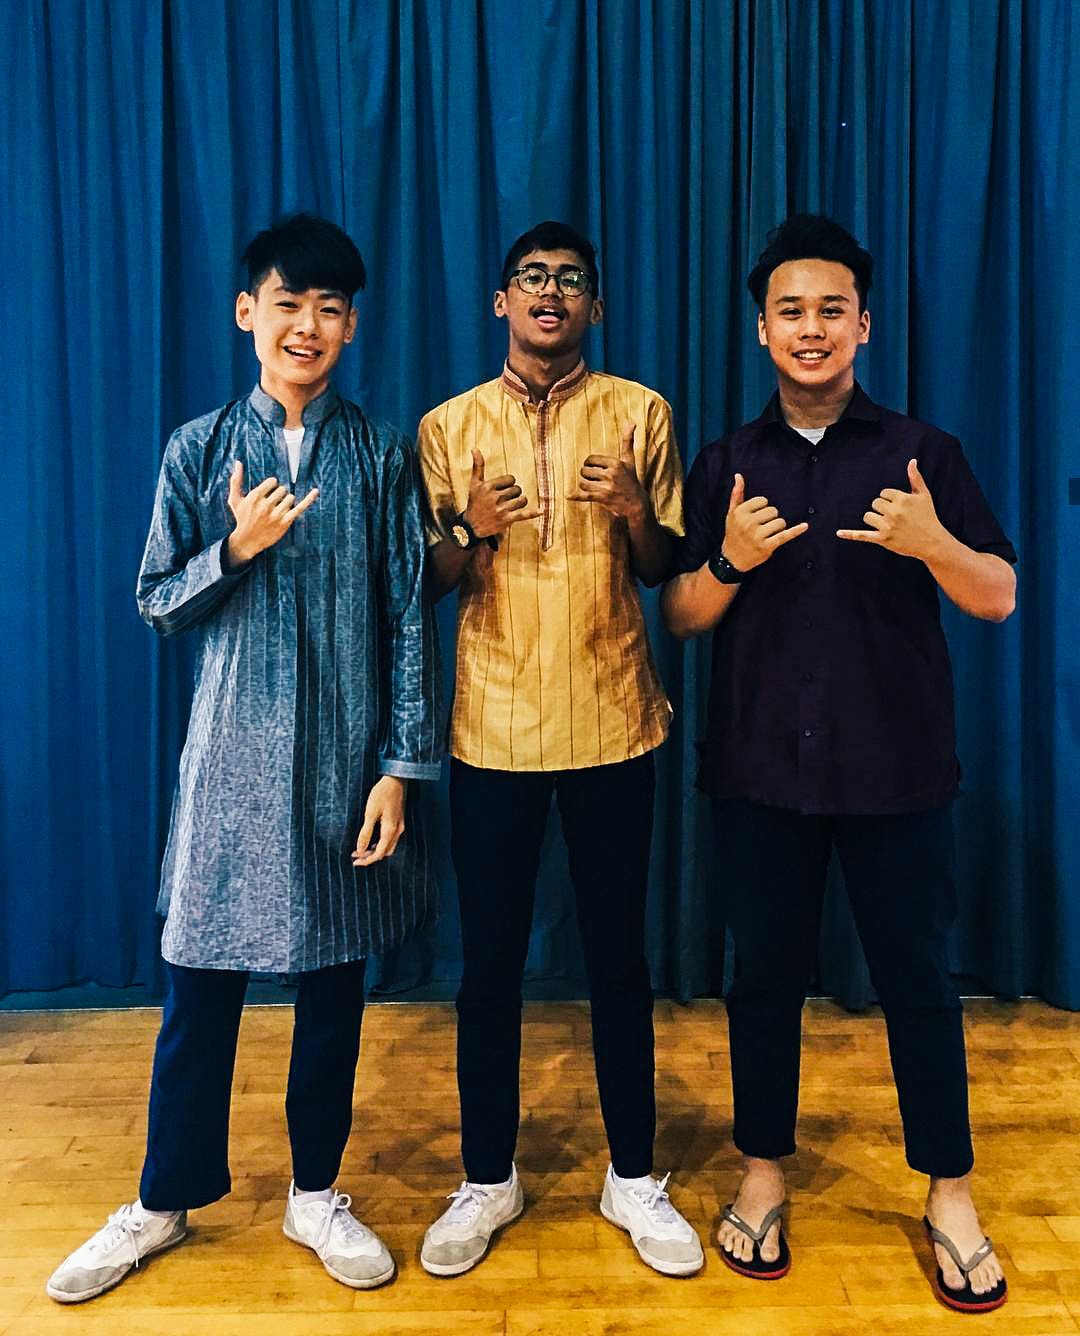 Racial Harmony Day Photo with friends